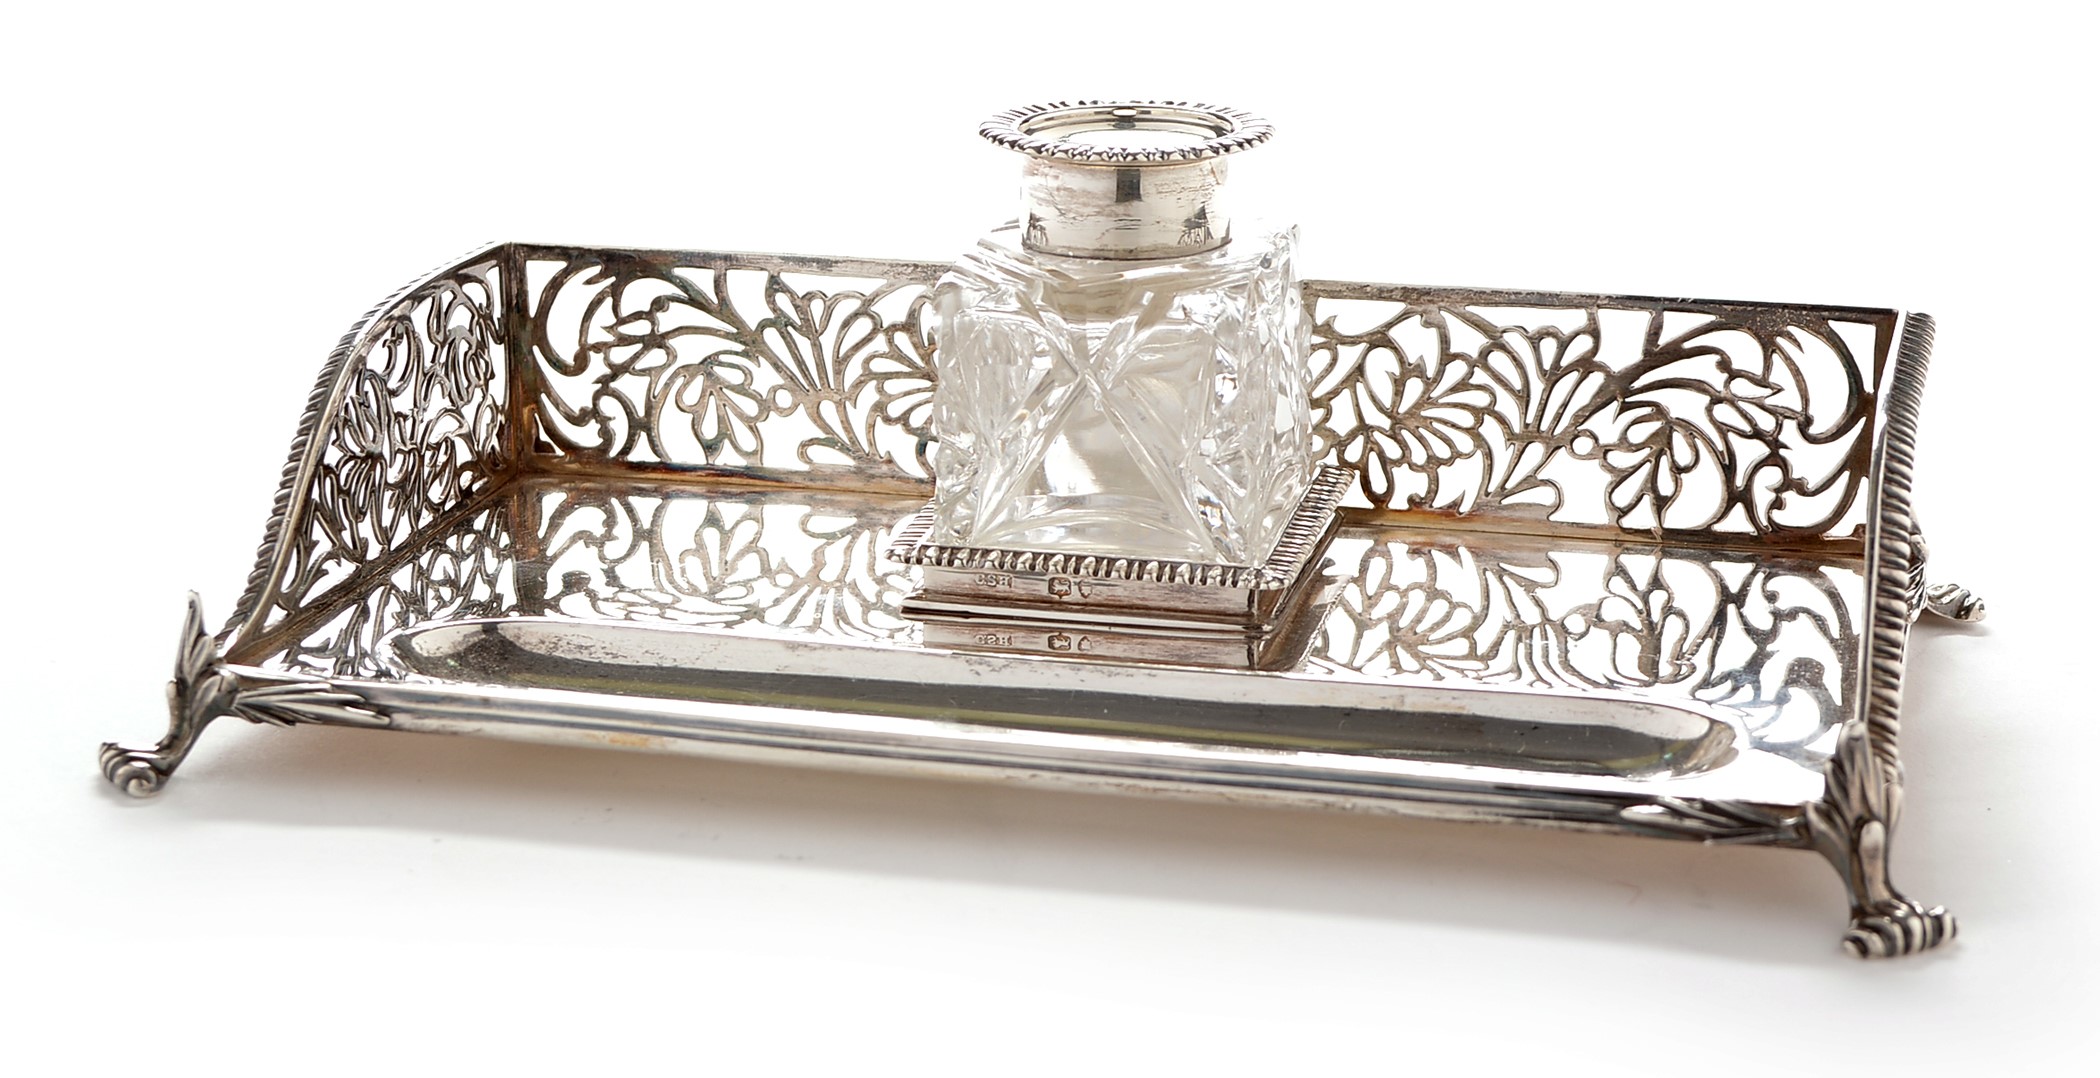 A Victorian silver pen and ink stand